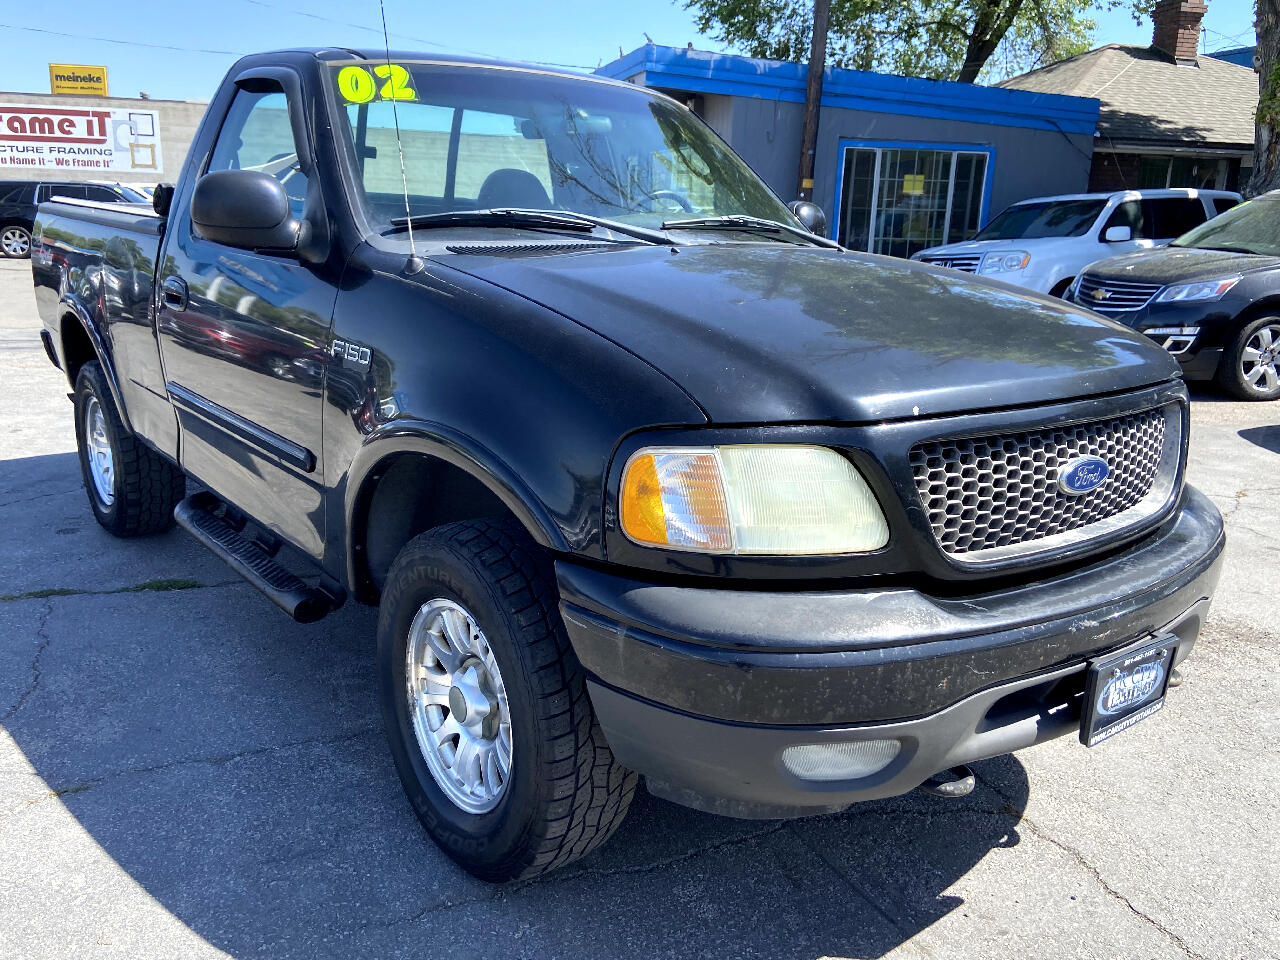 Used 2002 Ford F-150 Reg Cab 120" XLT 4WD for Sale in Salt Lake City UT 2002 Ford F150 4.2 Towing Capacity